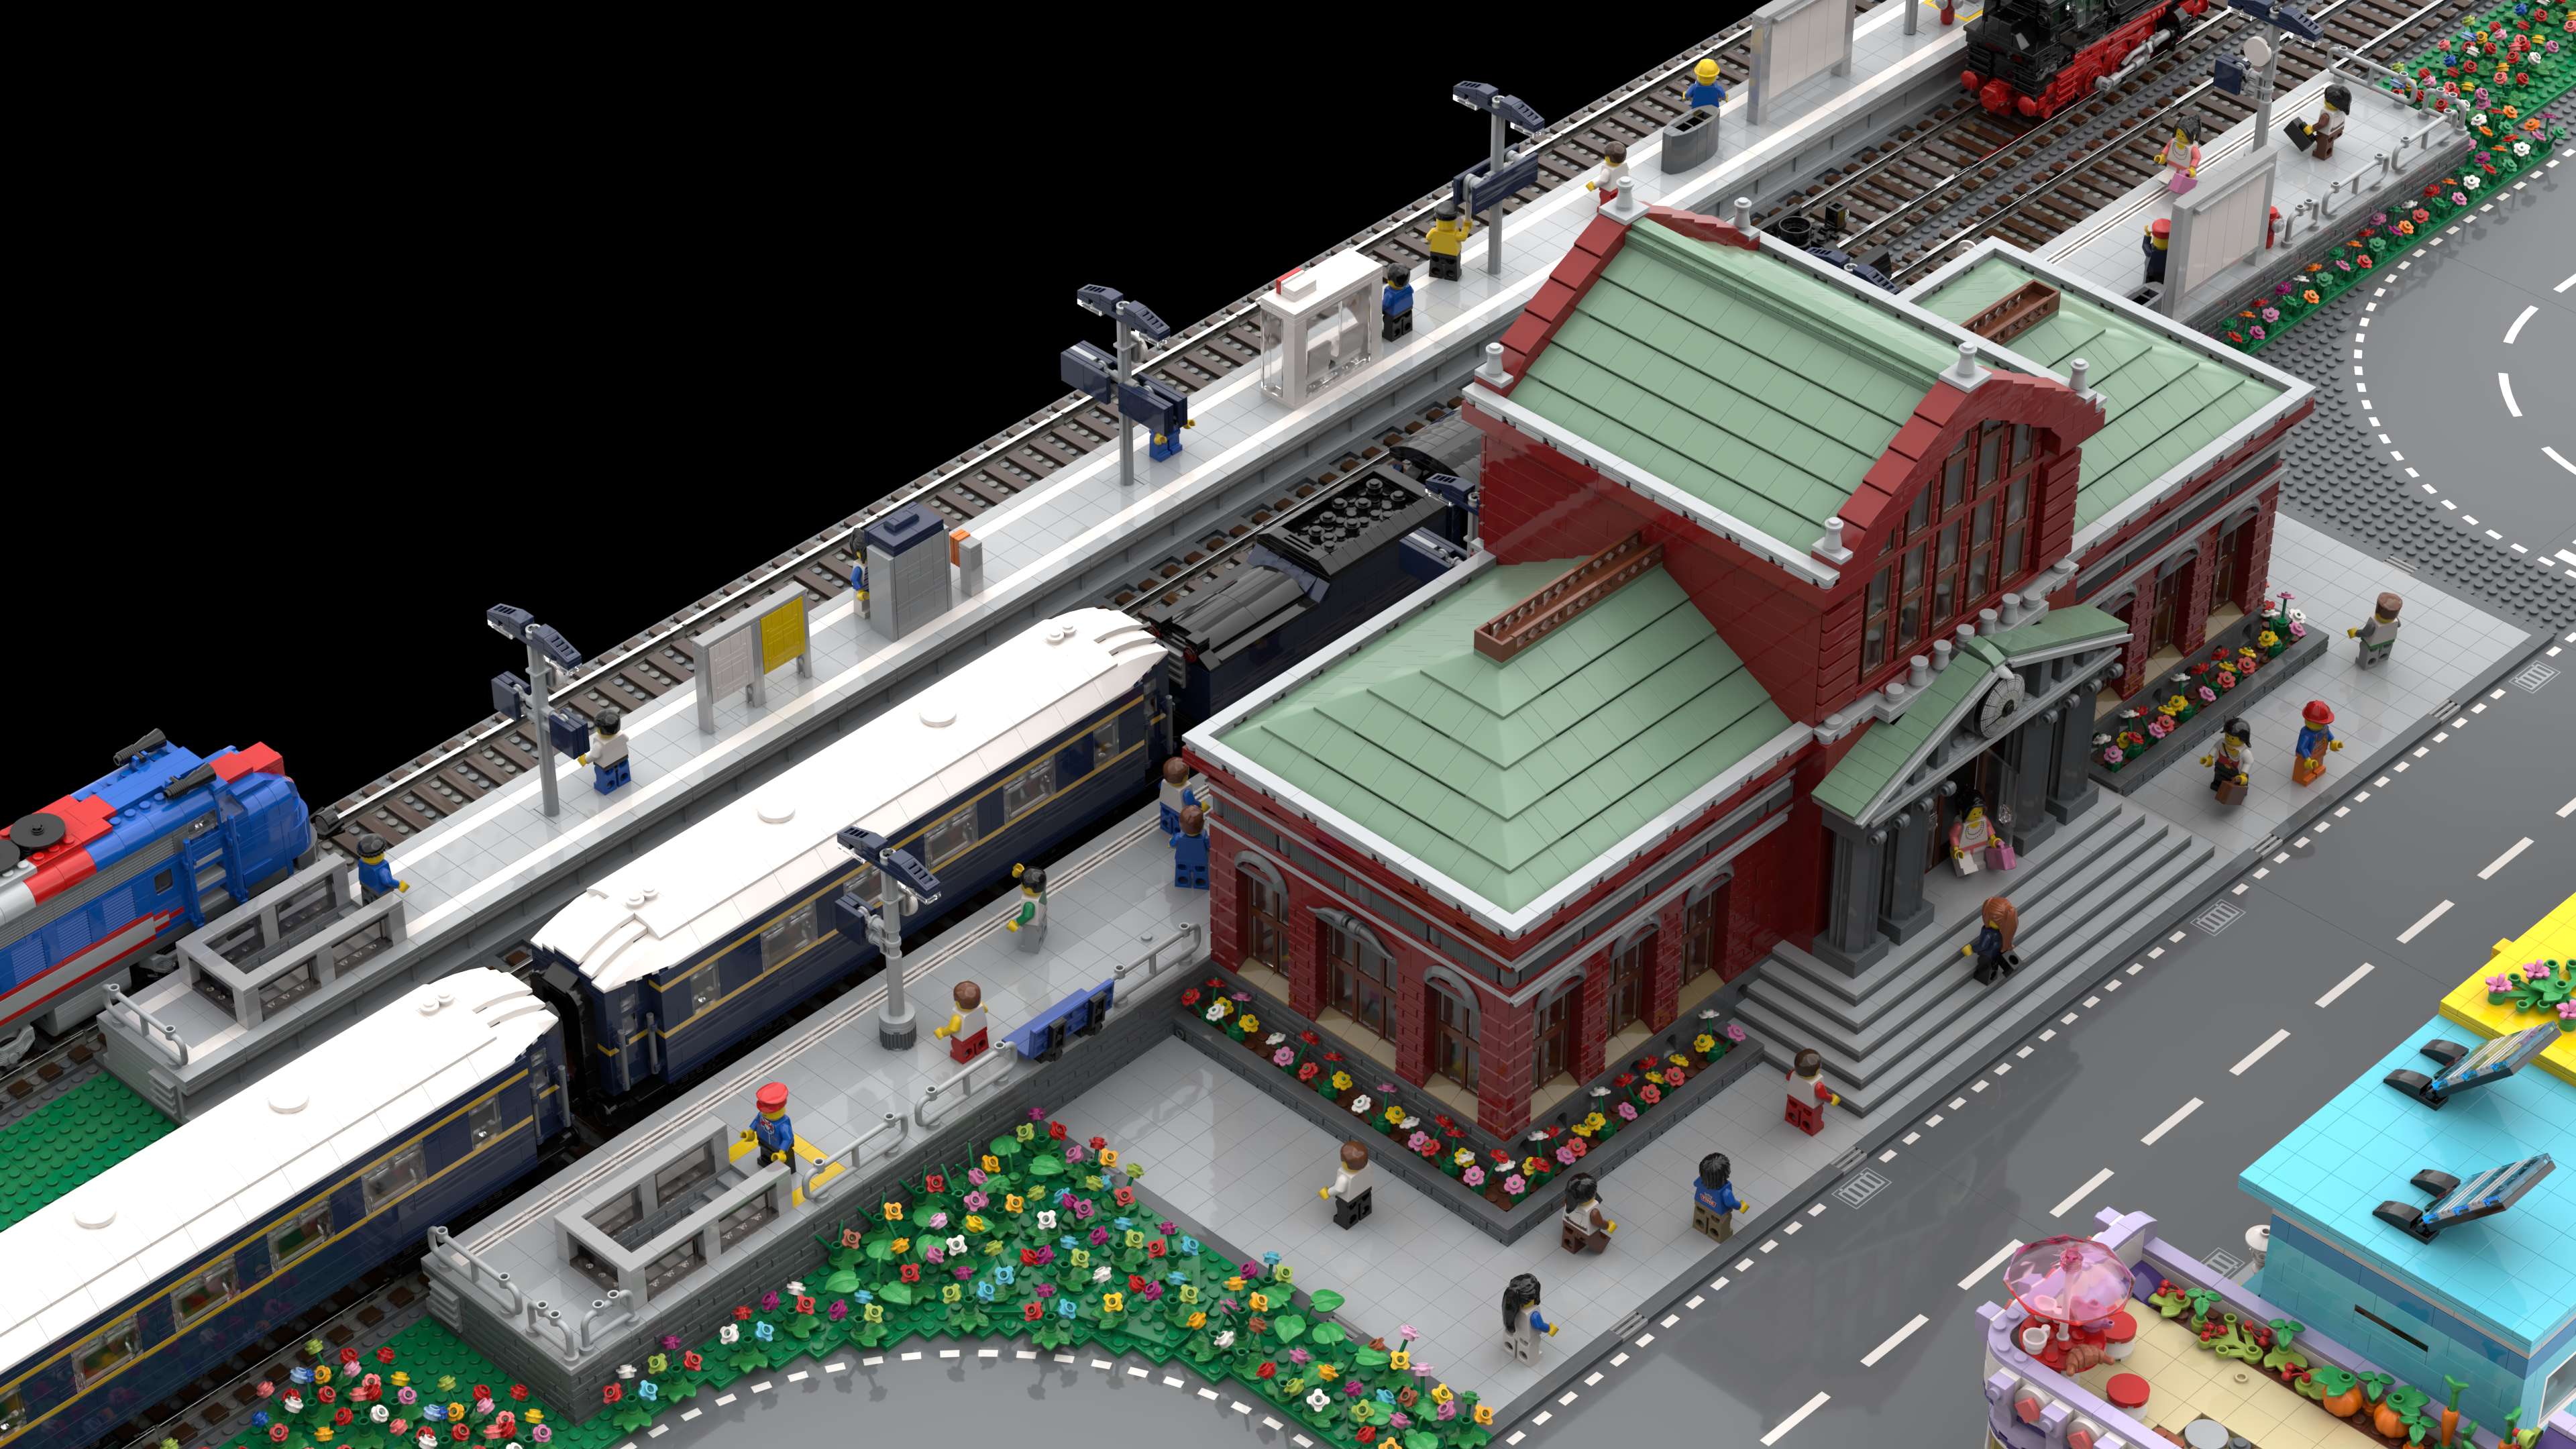 MOC-109869 Central Station V2 With 6820 Pieces